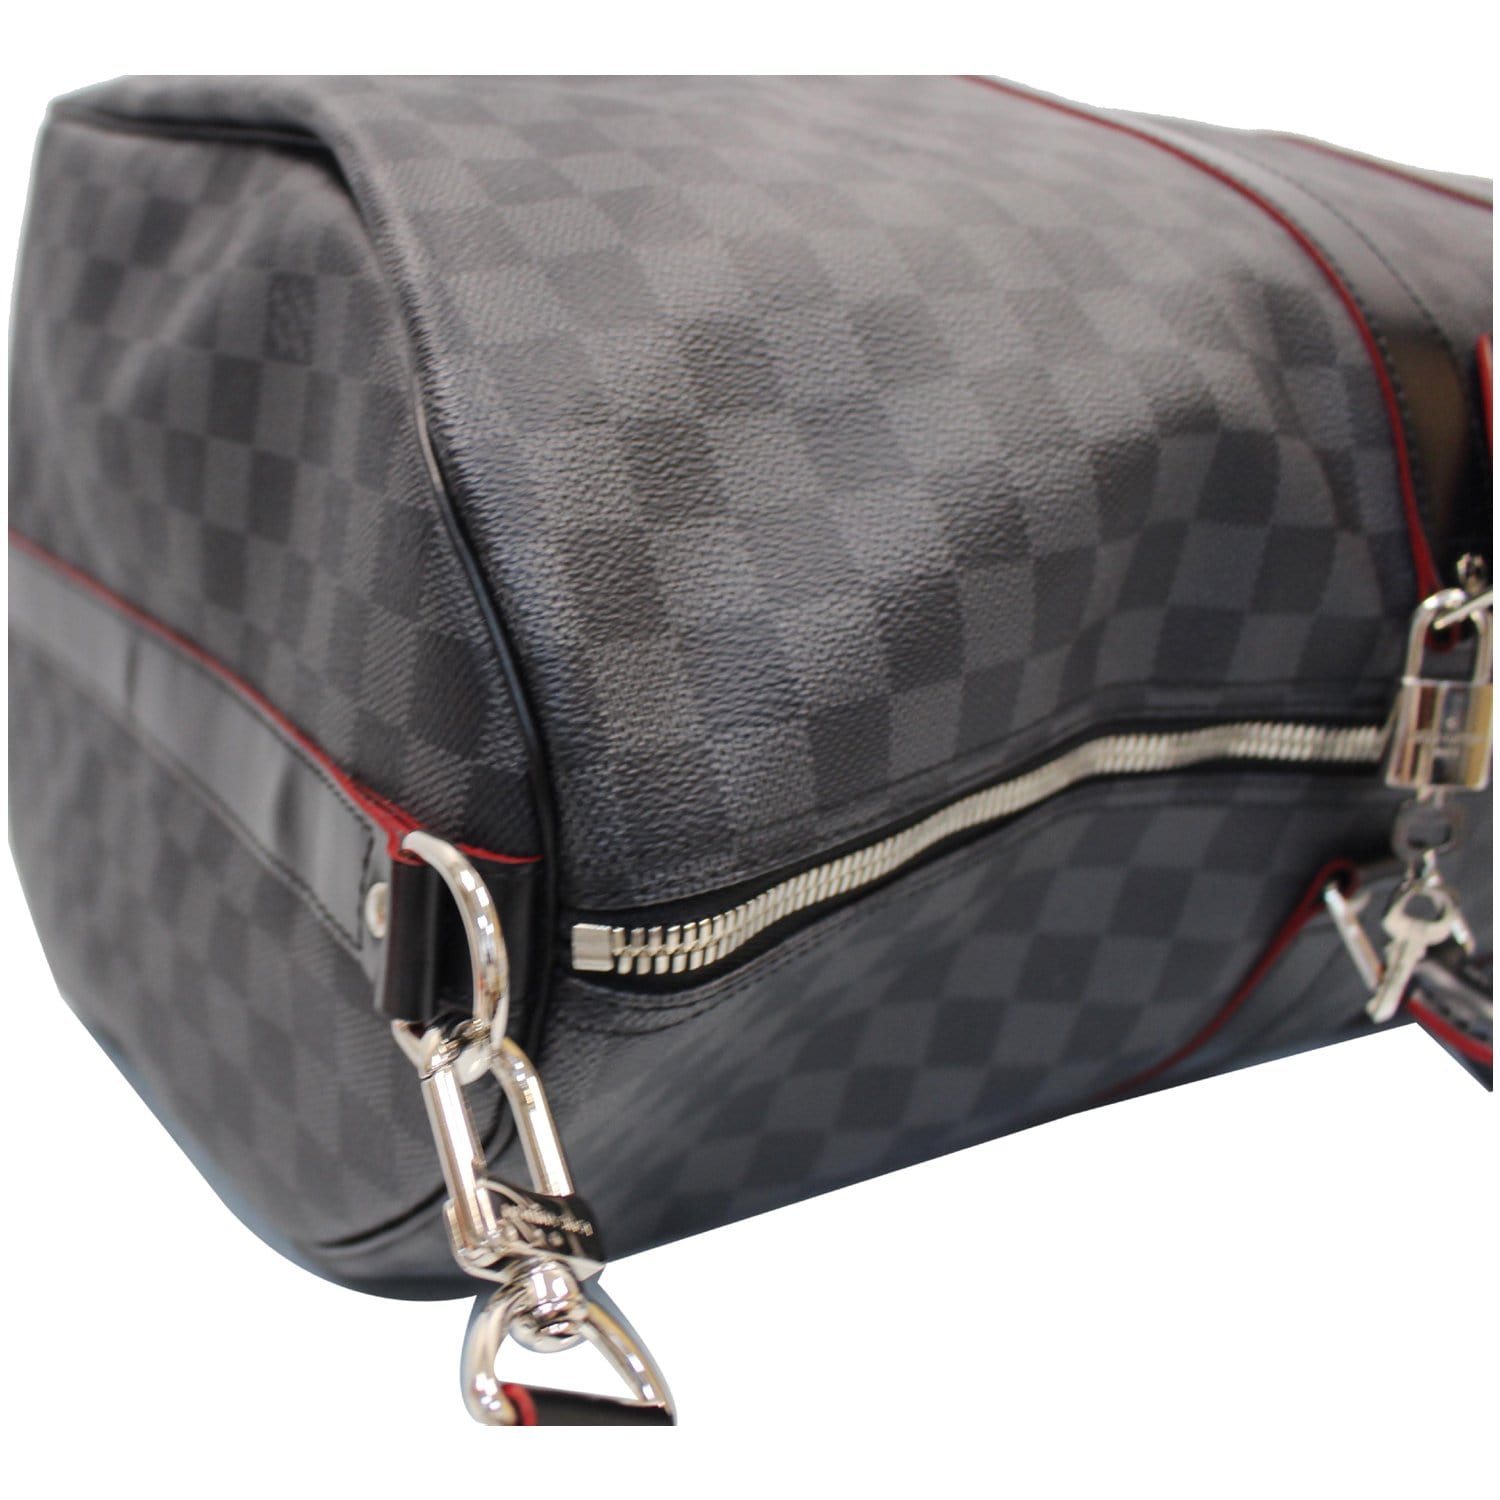 black louis vuitton bag with red interior